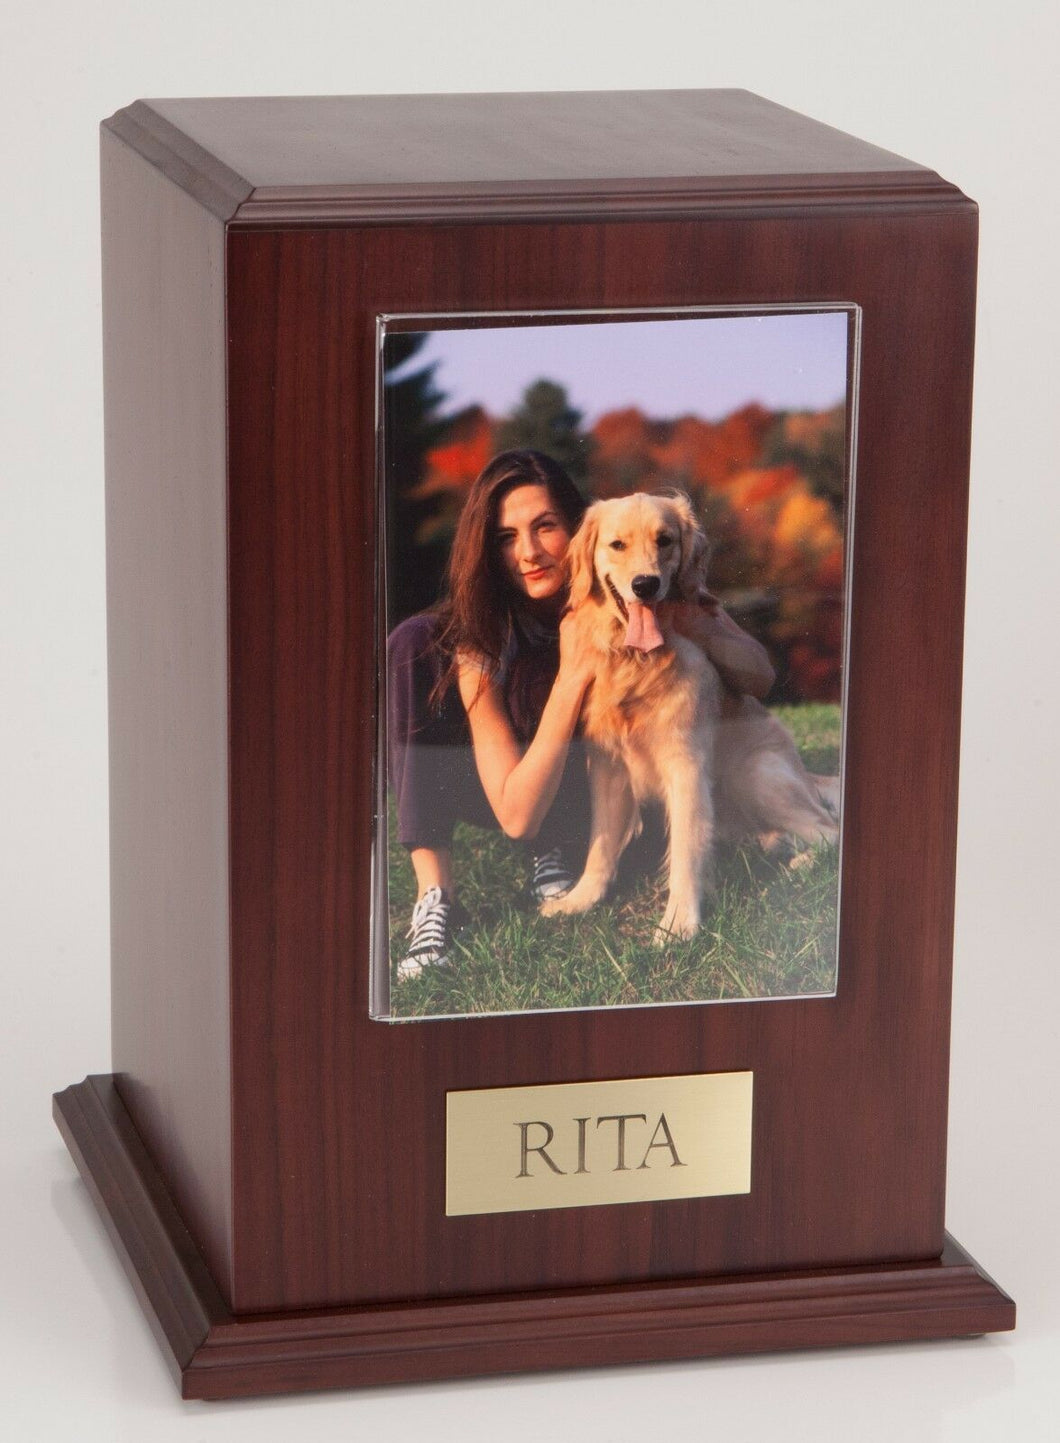 Large 110 Cubic Ins Walnut Pet Tower Photo Urn for Ashes w/Engravable Nameplate